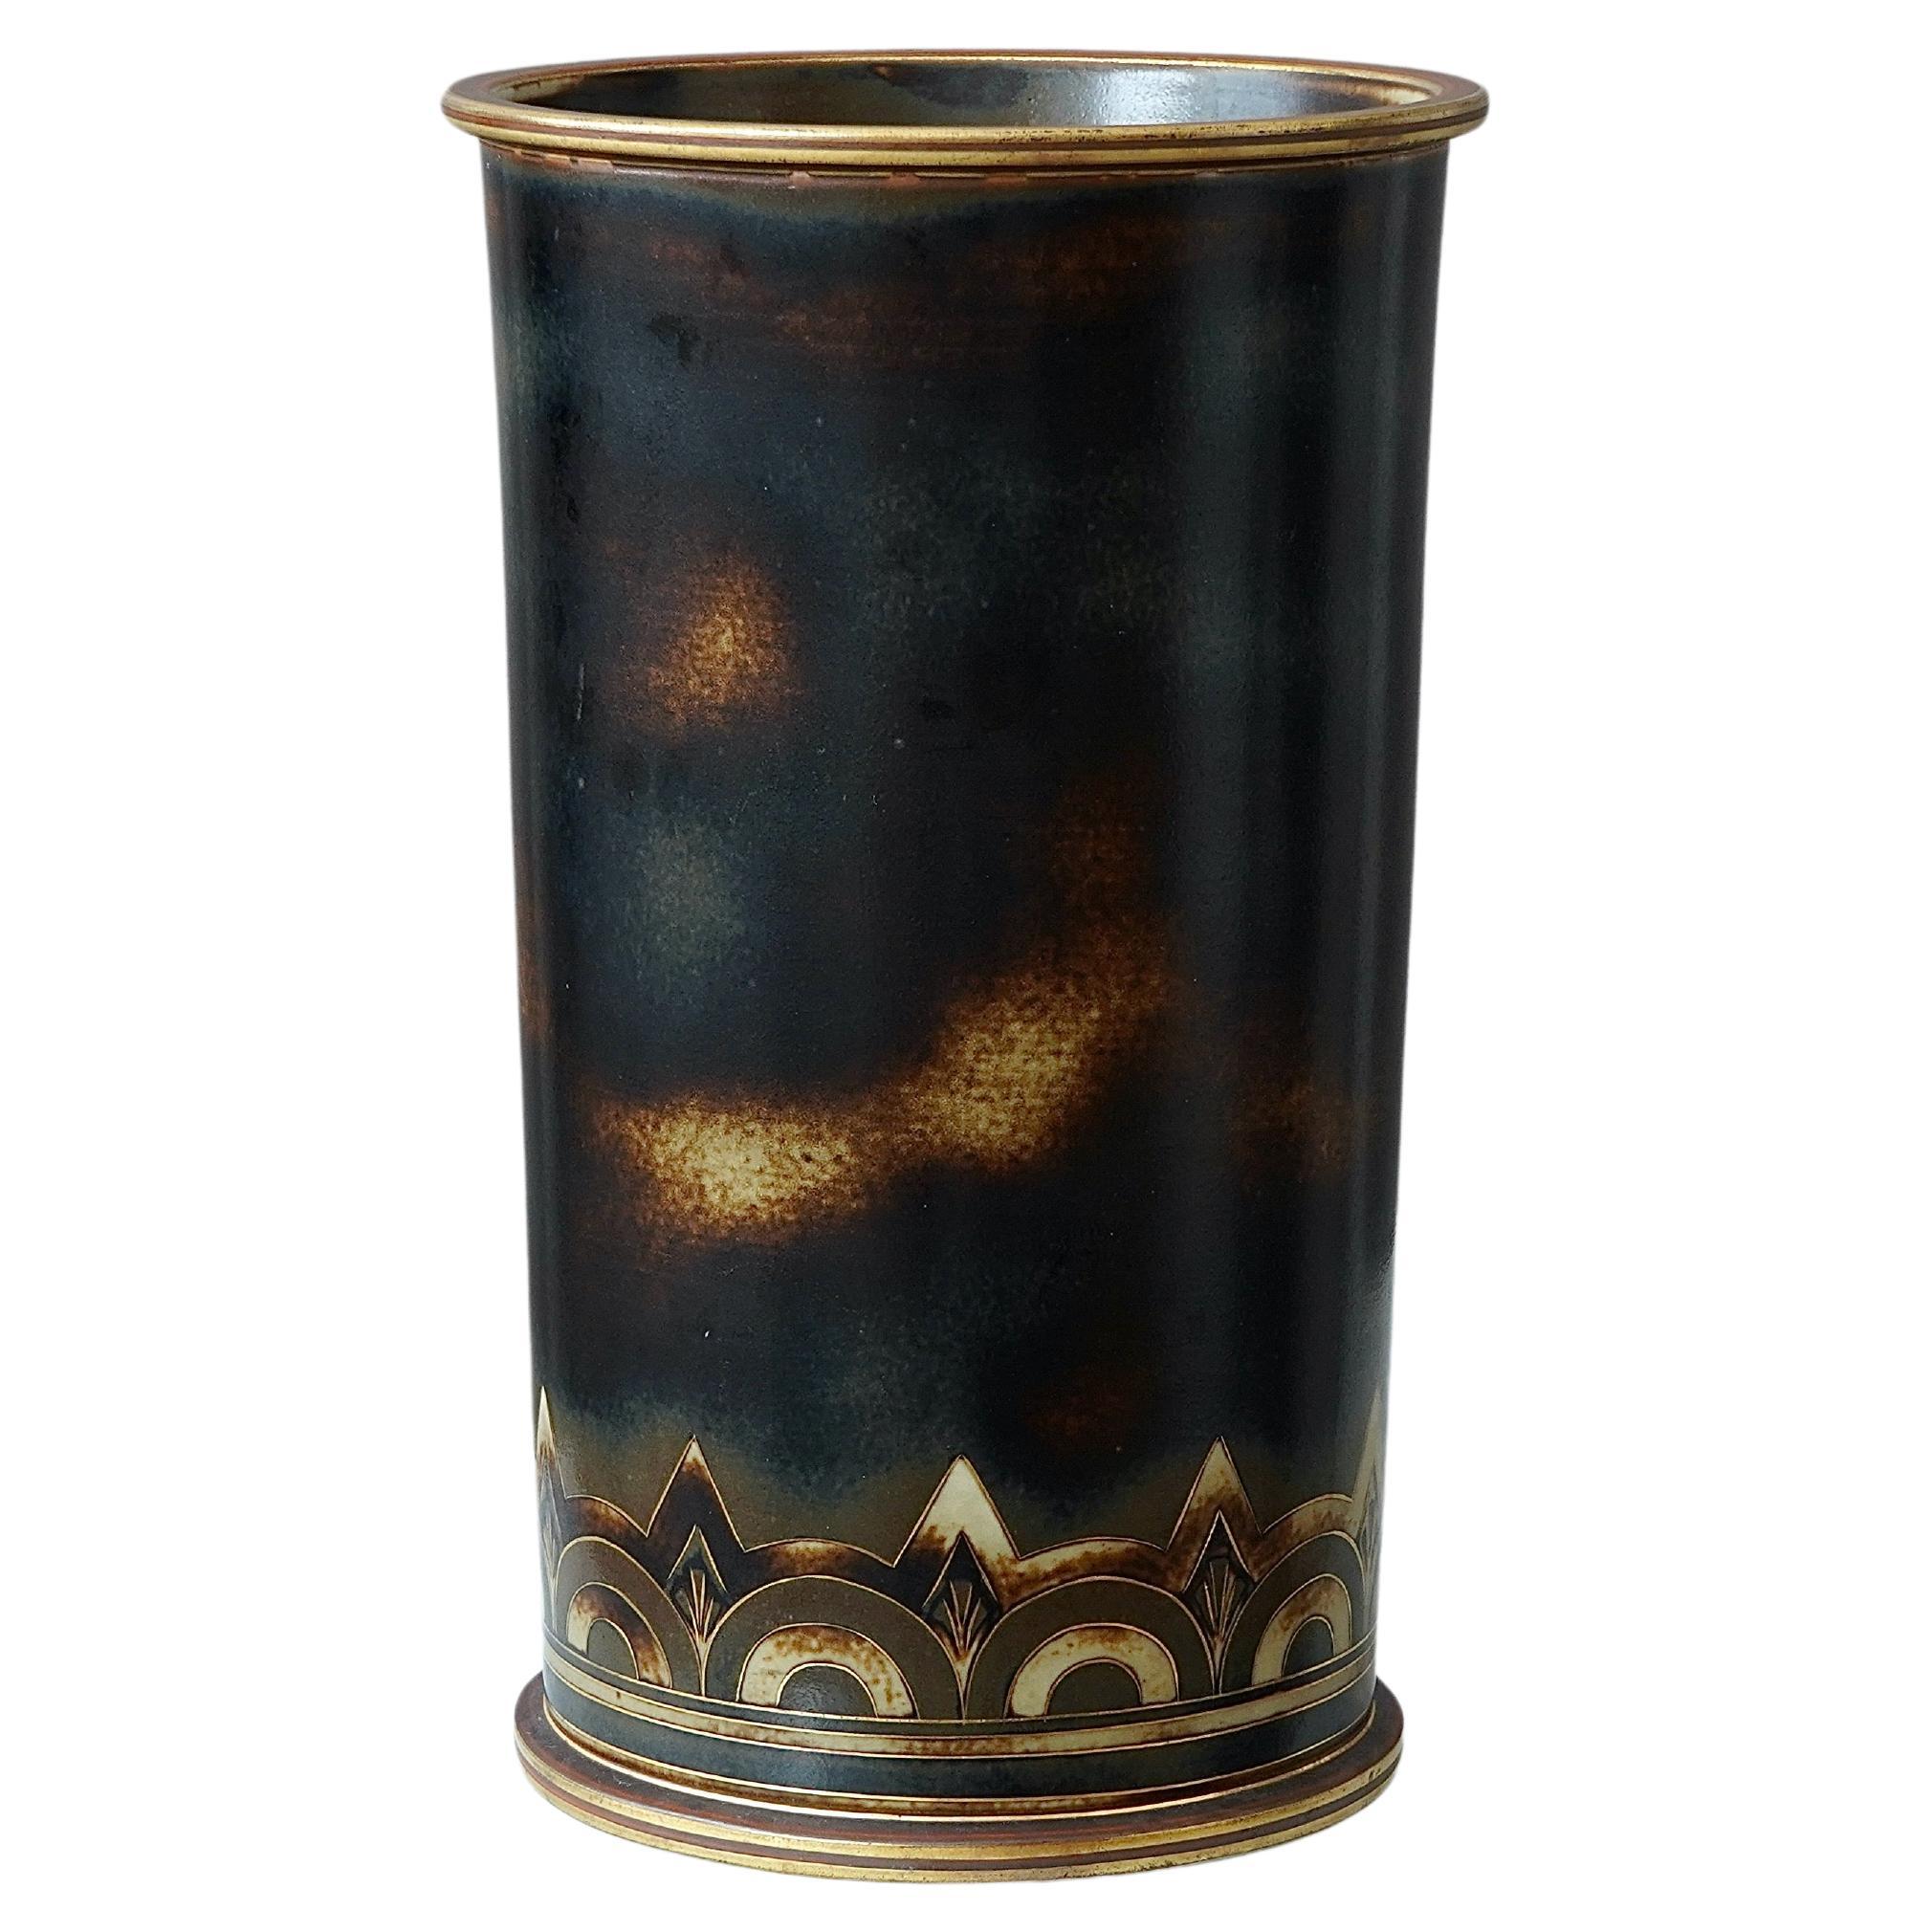 Large and Unique Art Deco Vase by Gunnar Nylund for ALP, Sweden, 1930s